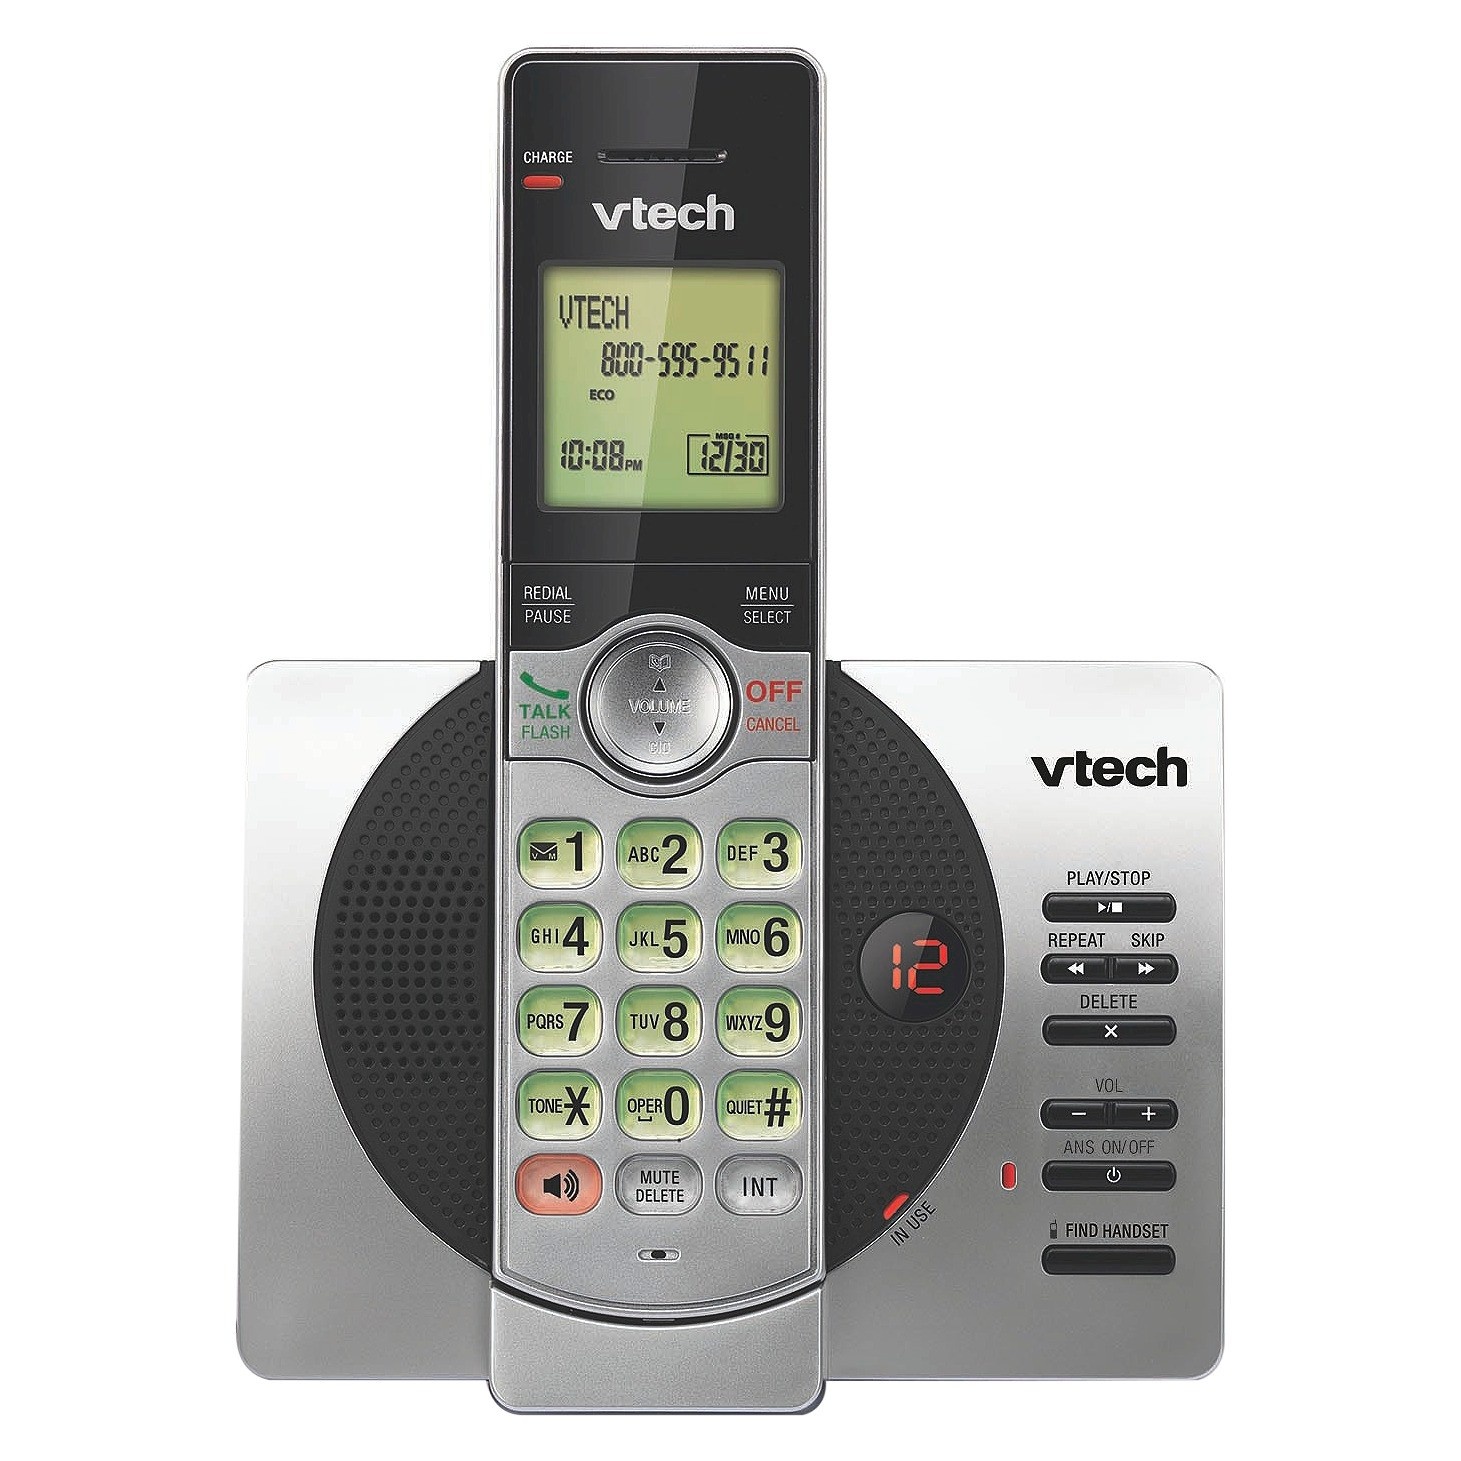 slide 1 of 3, V-Tech VTech CS6929 DECT 6.0 Expandable Cordless Phone System with Answering Machine, 1 Handset - Silver, 1 ct